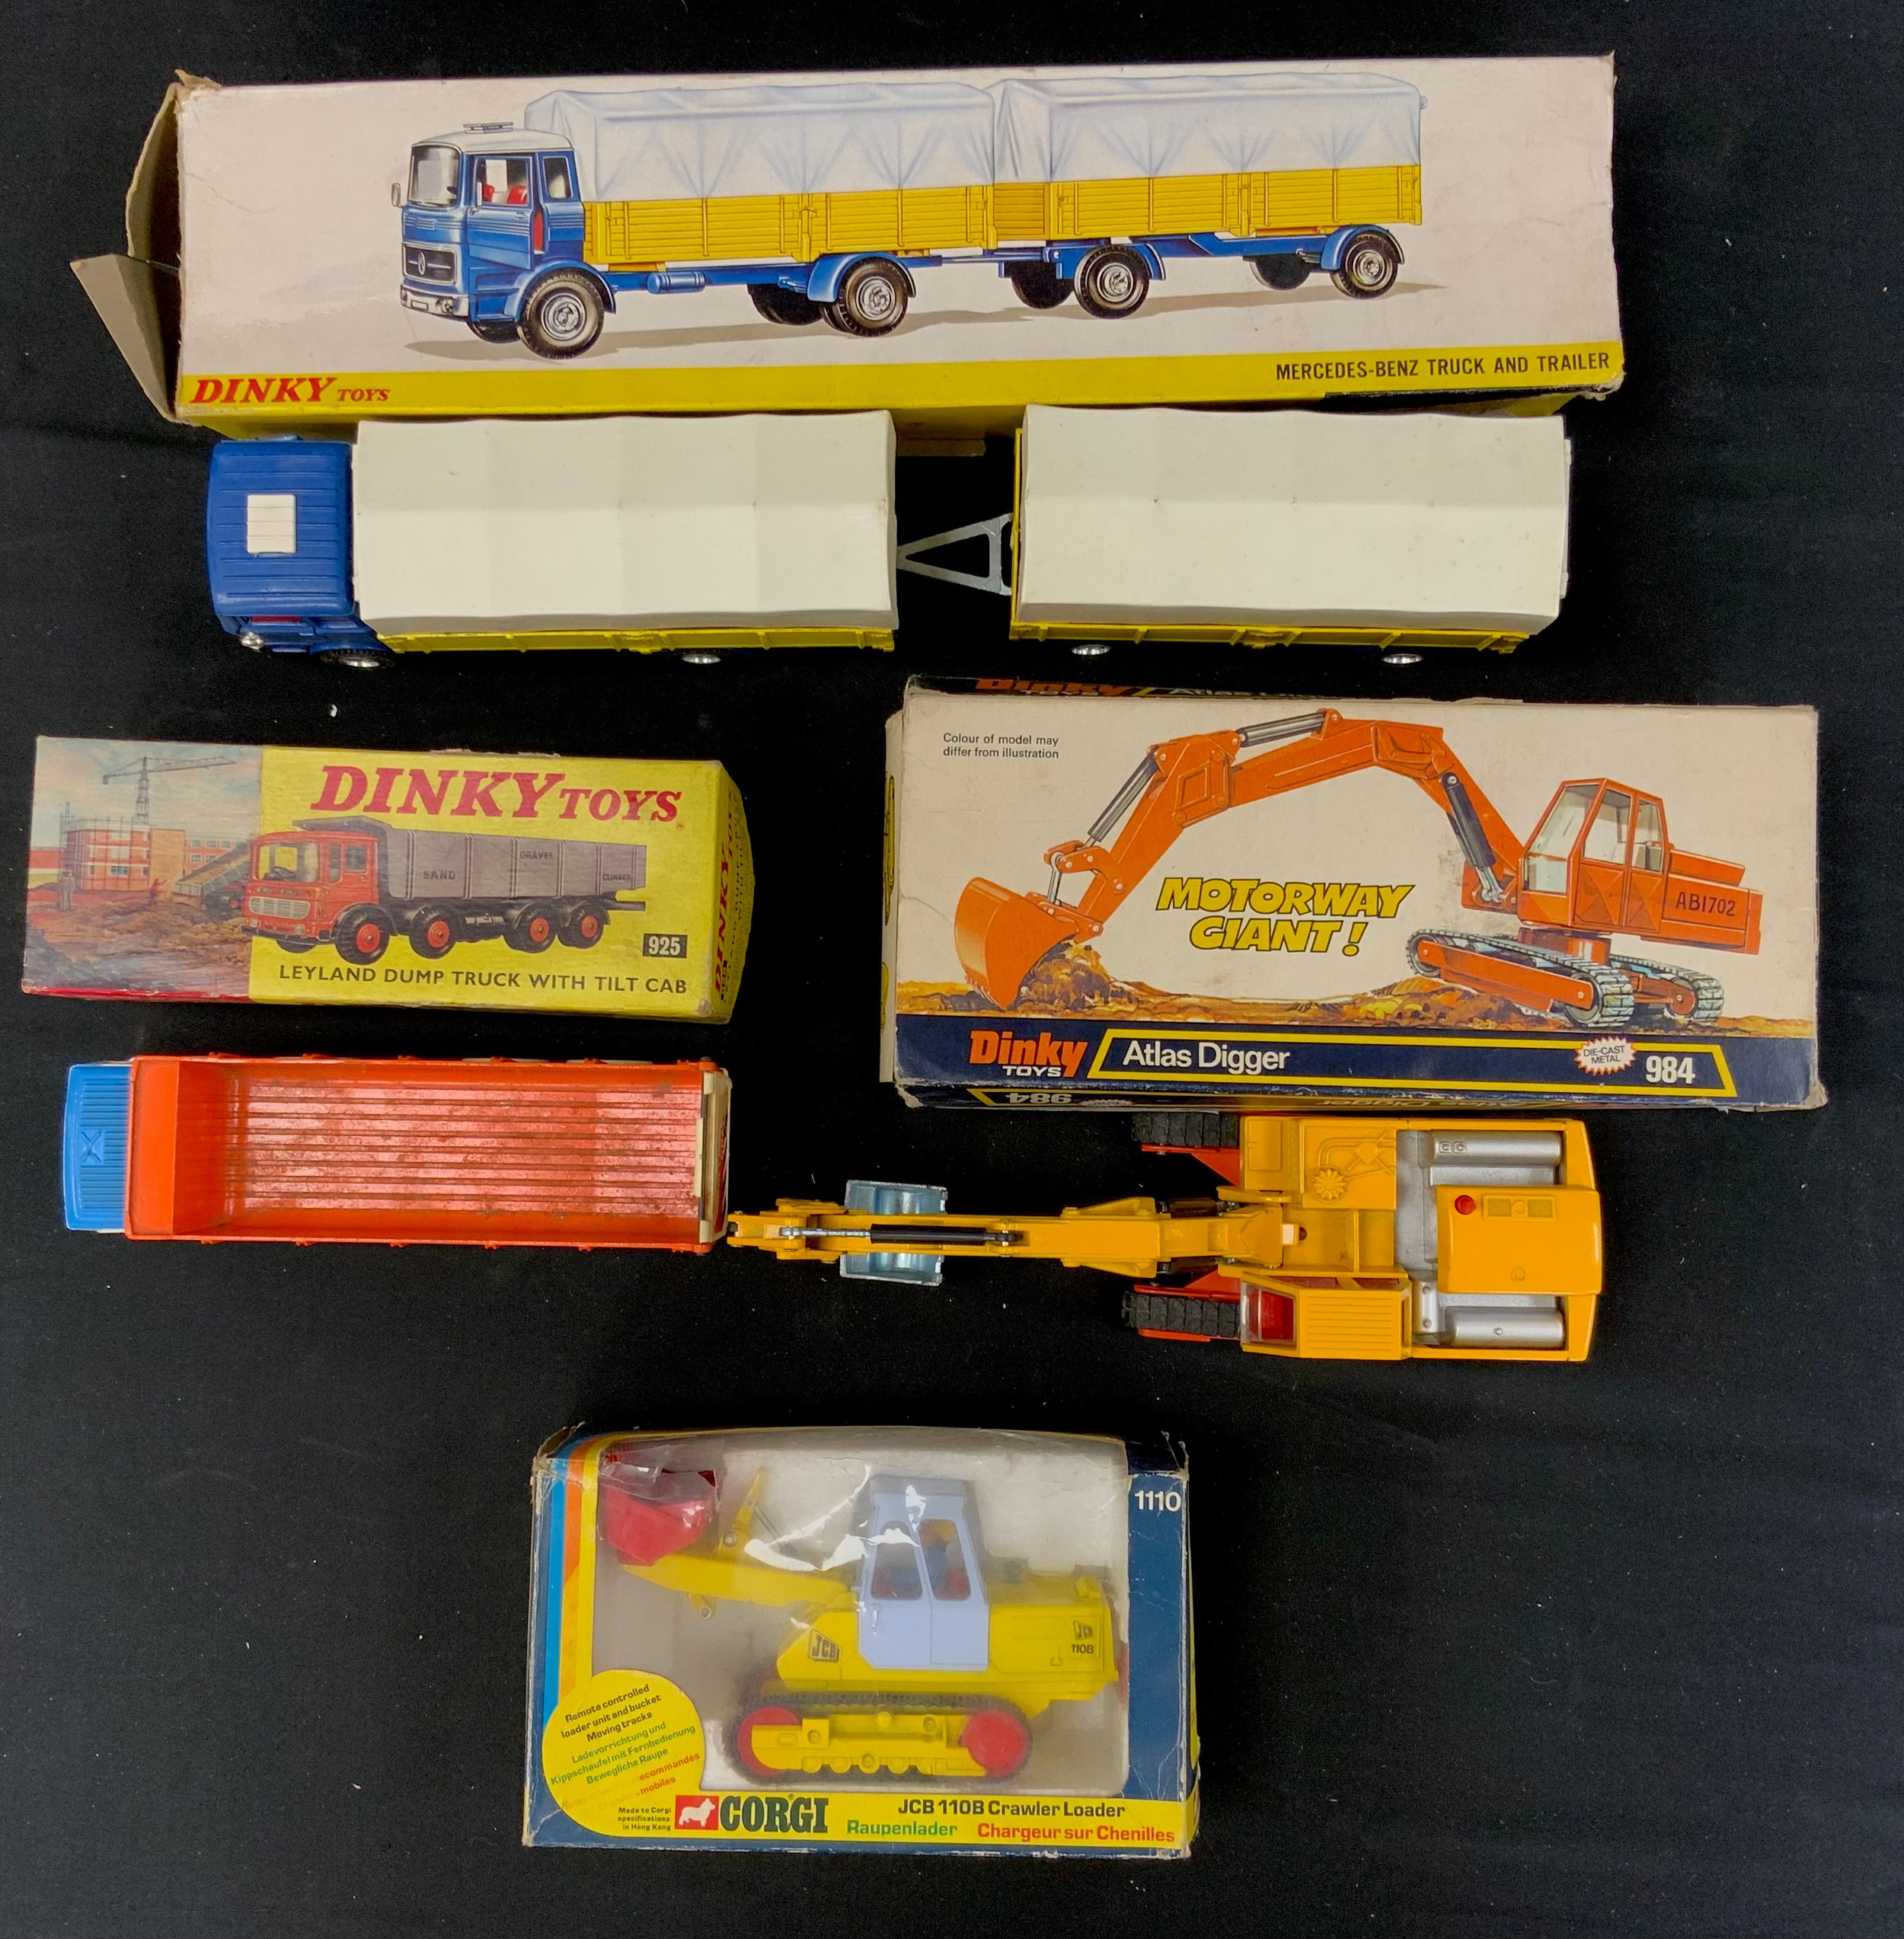 A boxed Dinky Toys No.917 Mercedes-Benz Truck and Trailer; 925 Leyland Dup Truck with Tilt Cab, - Image 2 of 2